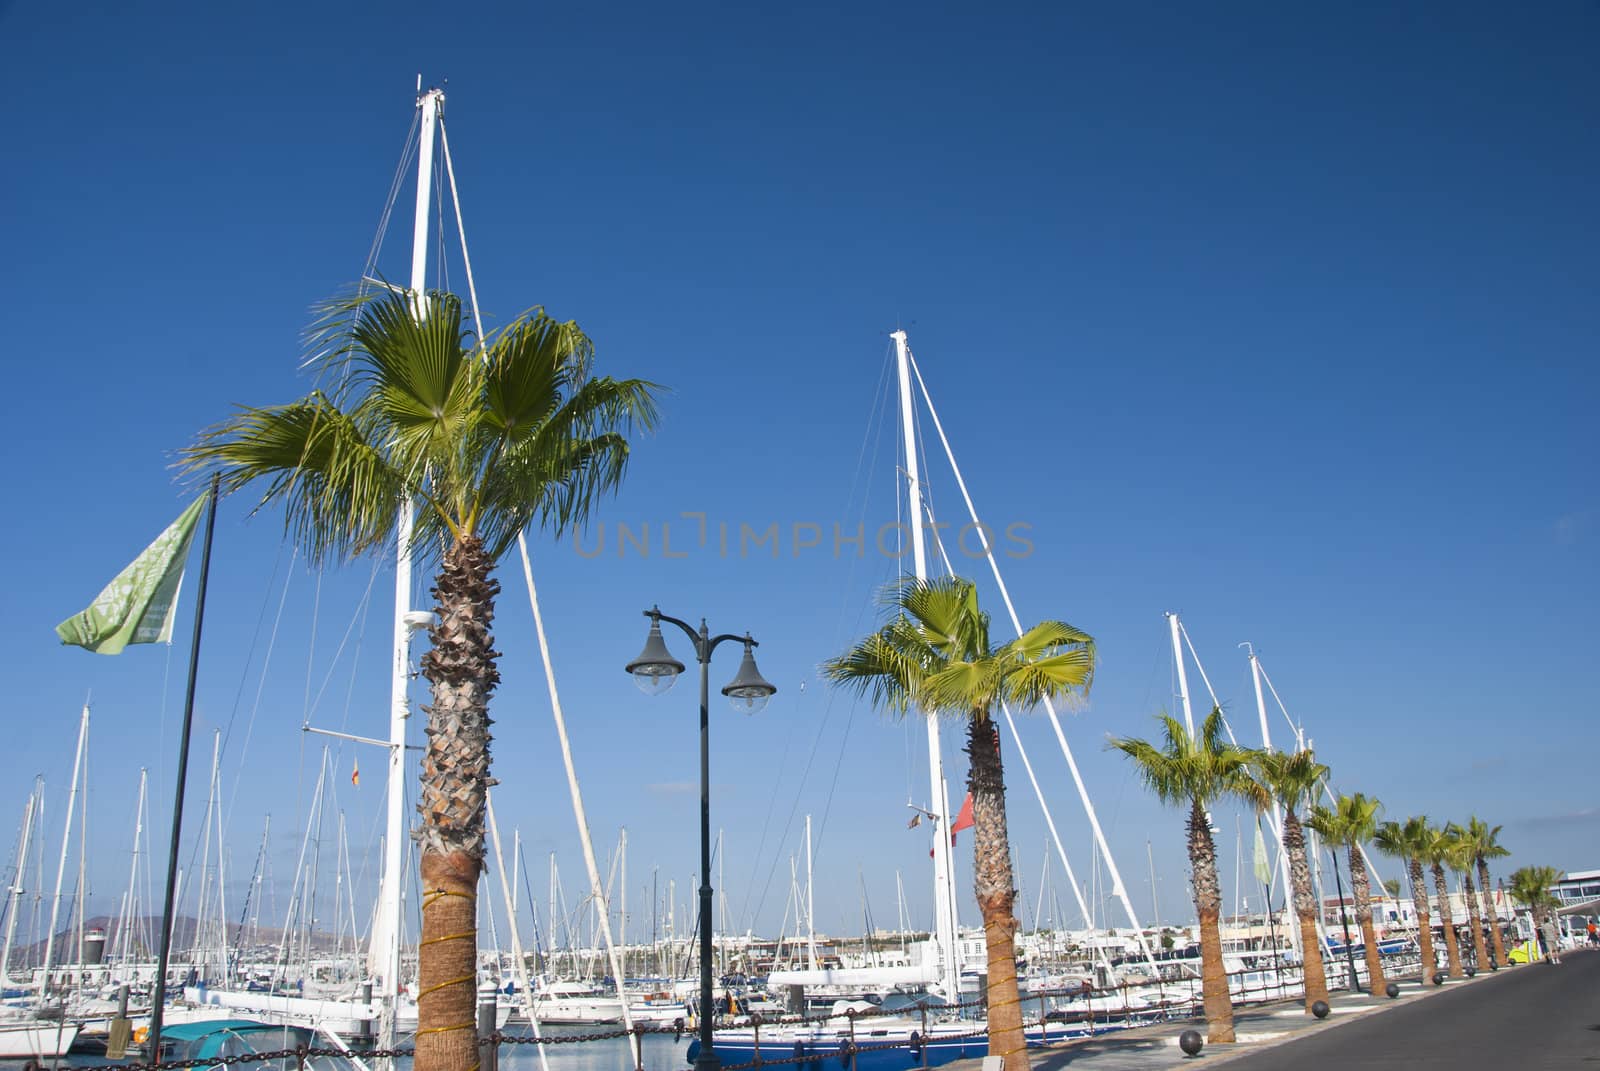 An Avenue of Palm Trees and Yacht Masts on a Marina in Lanzarote Canary Islands